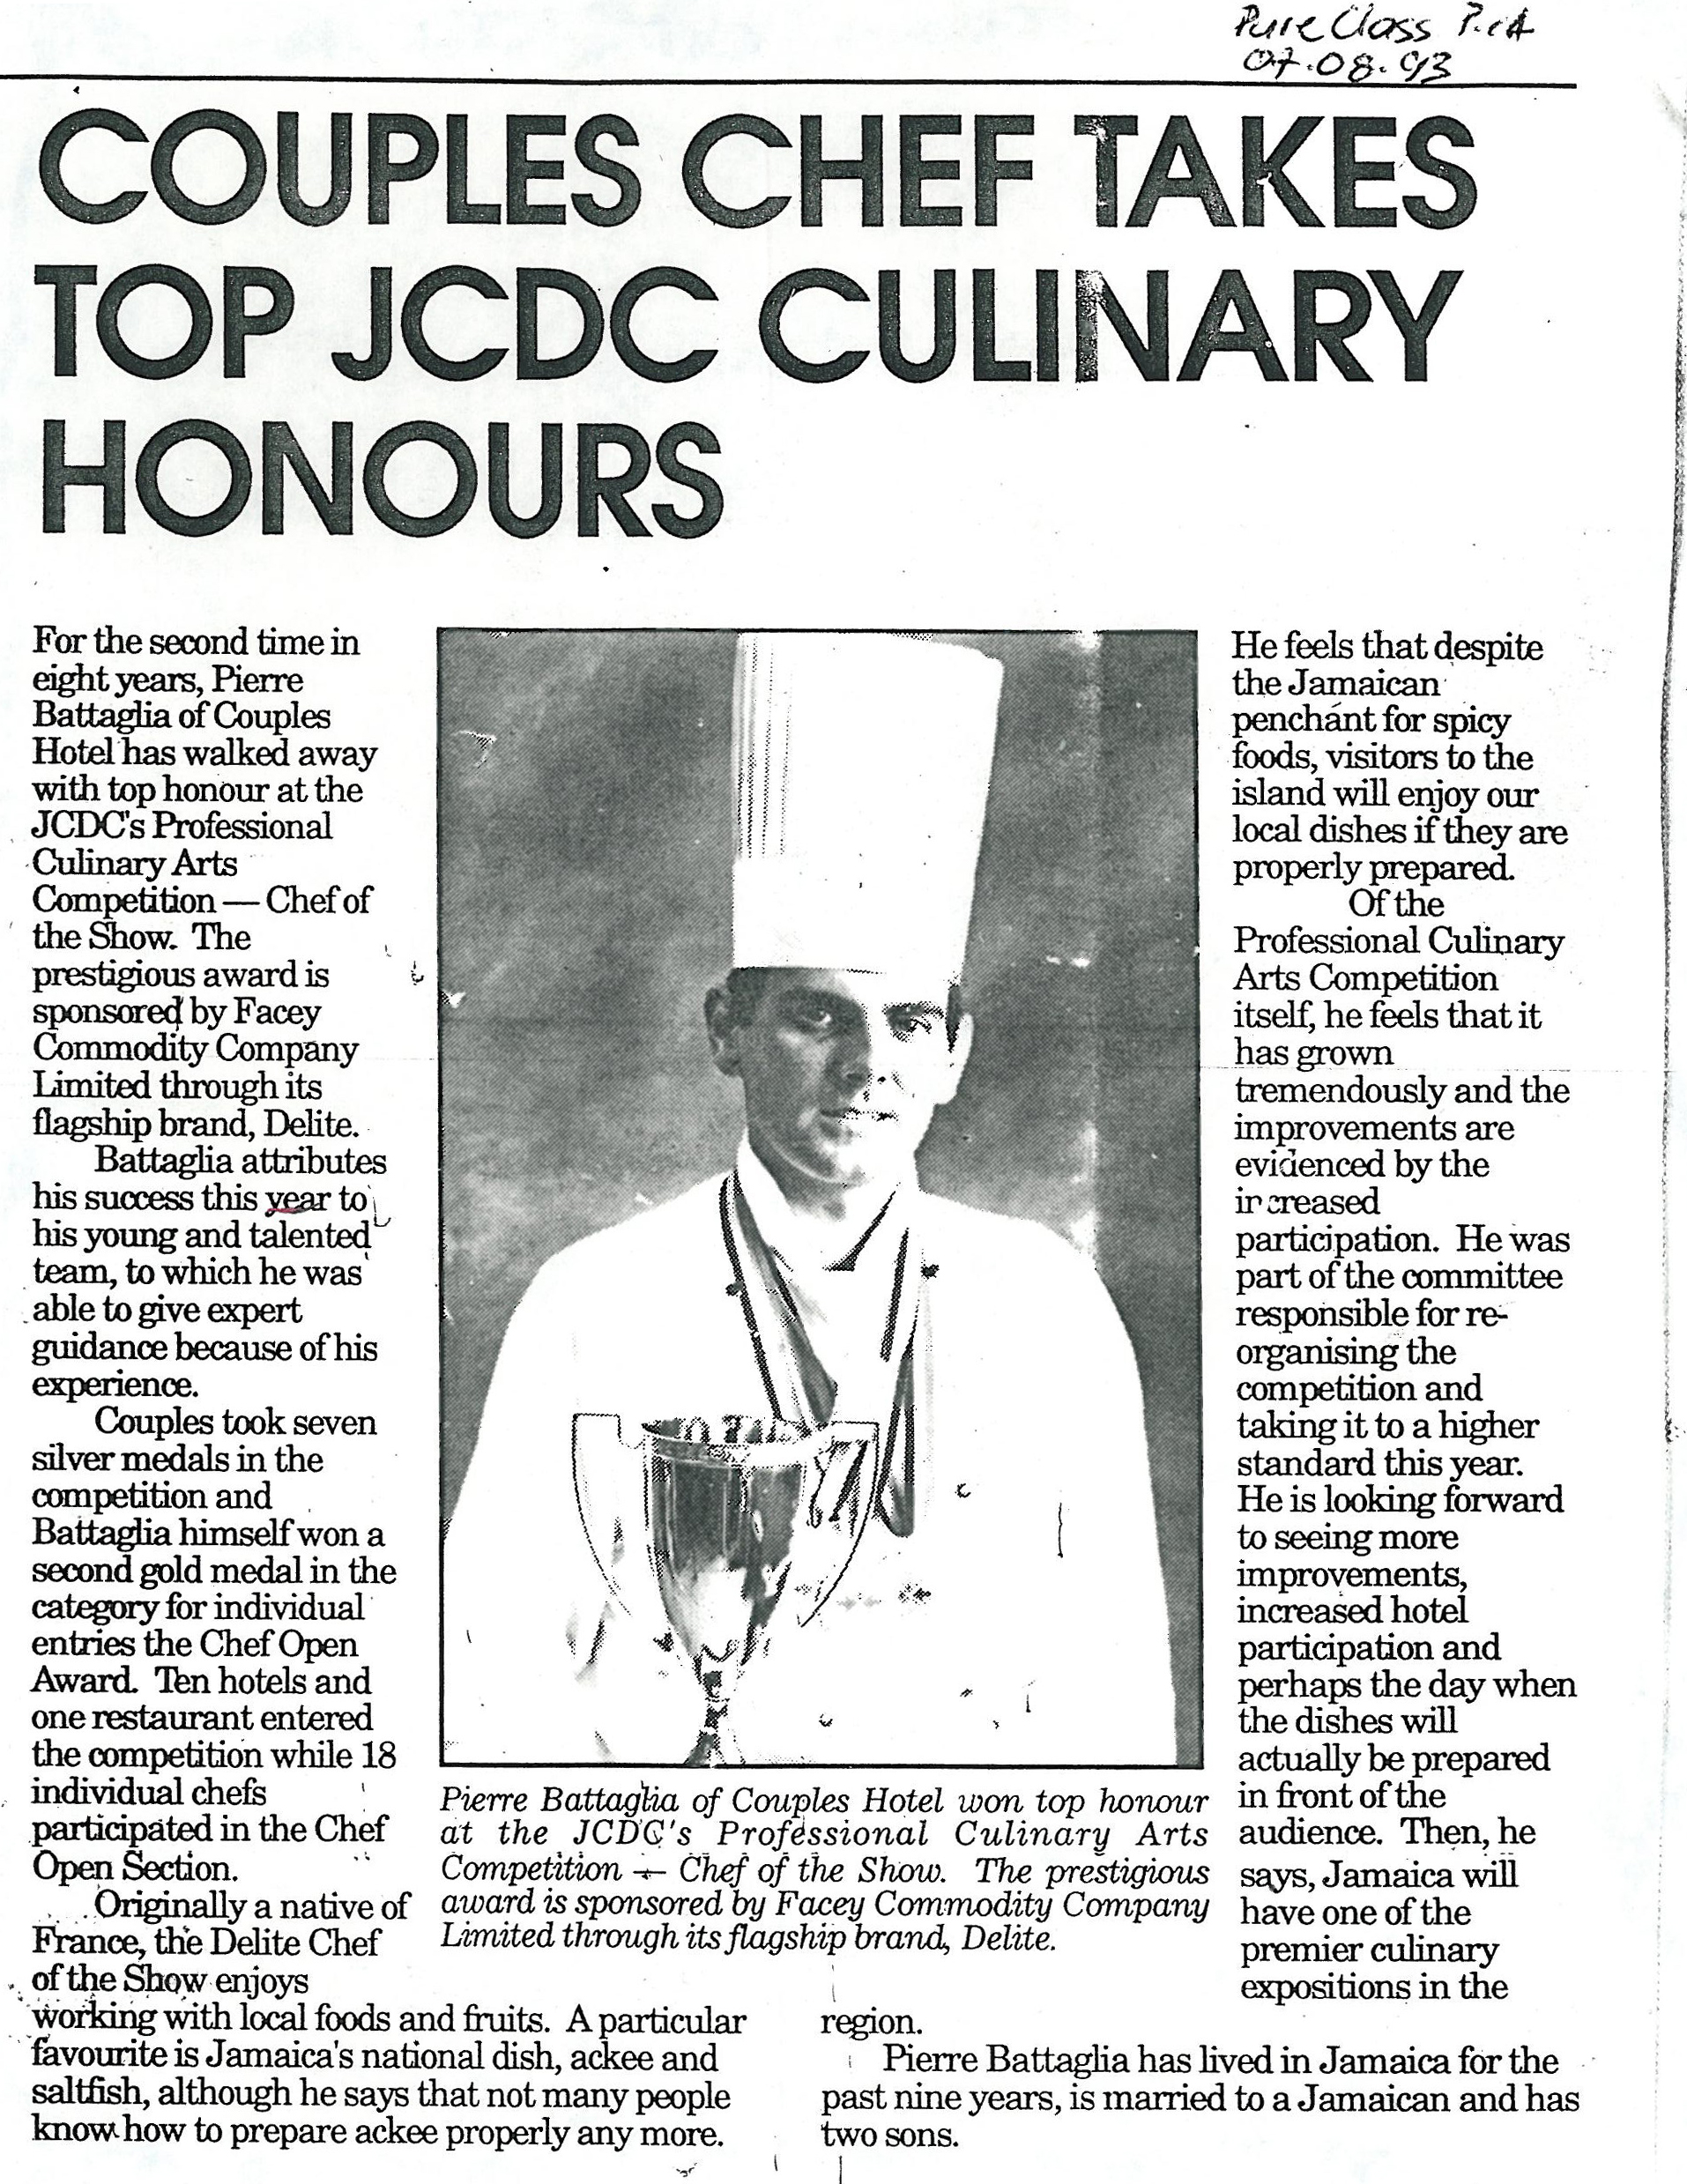 Couples chef takes top JCDC culinary honours